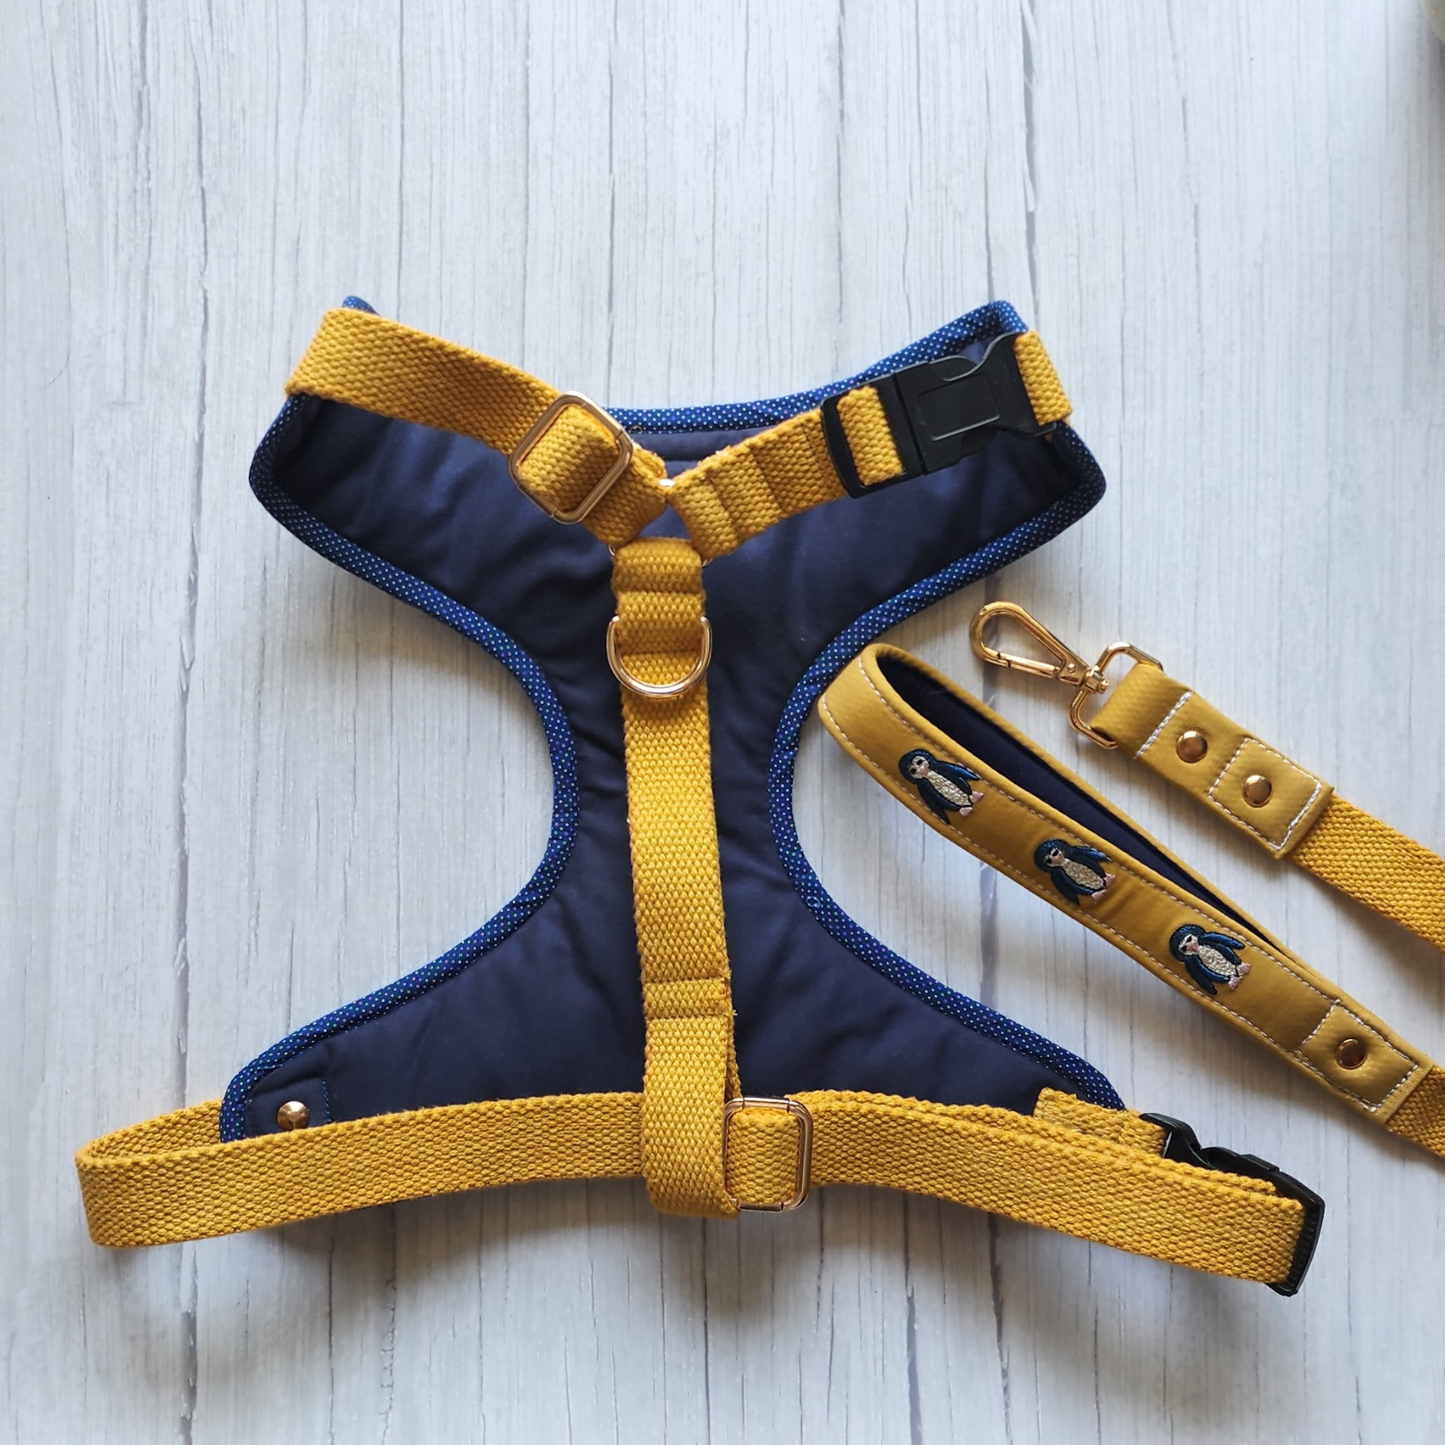 Cotton Dog Harness | Durable dog harness India